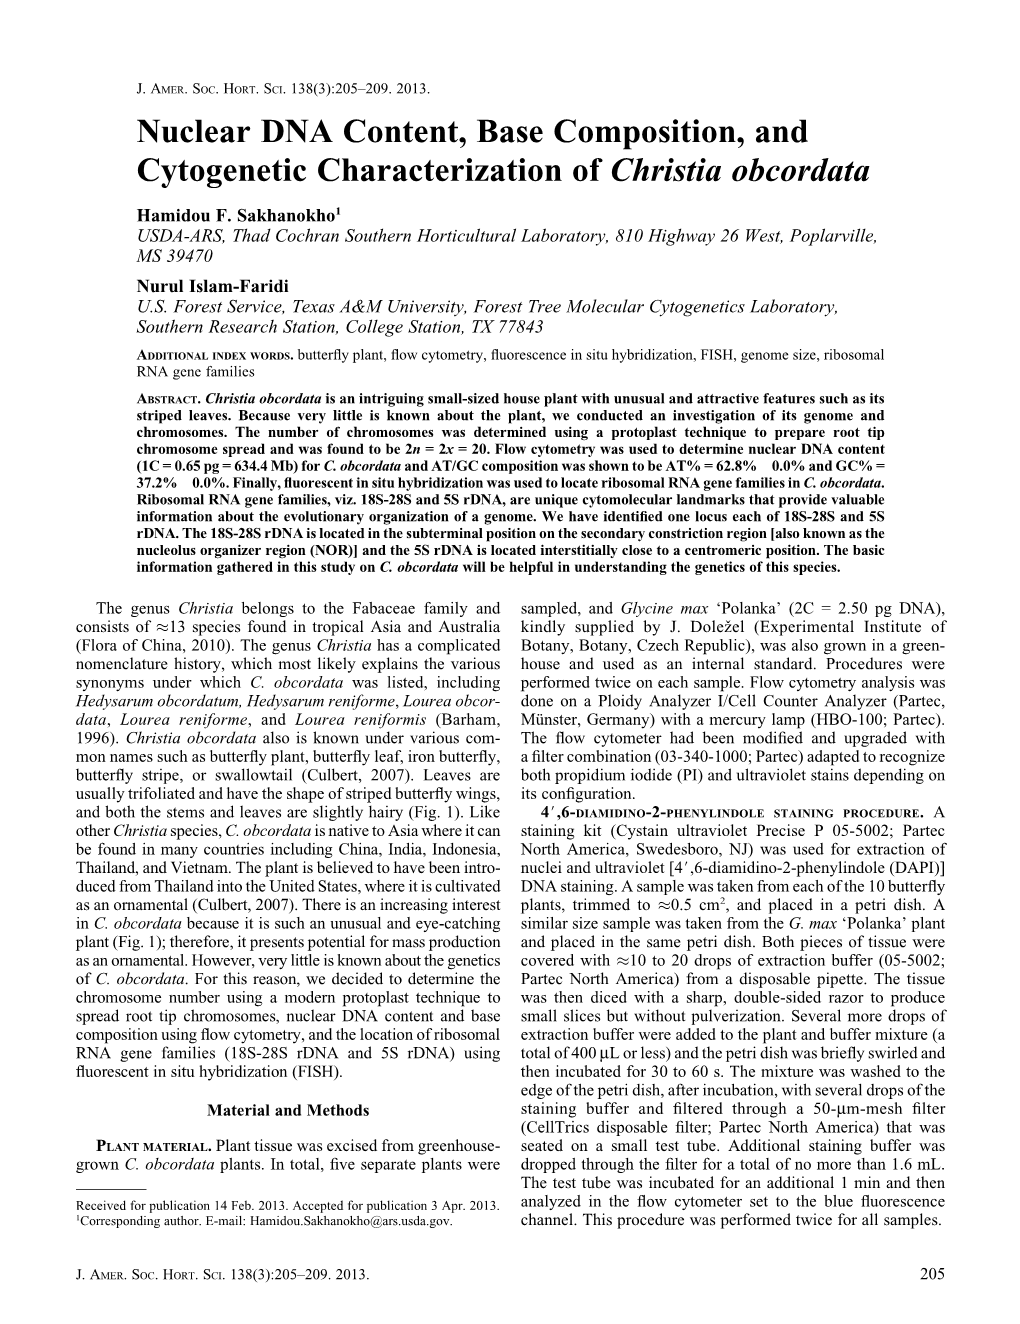 Nuclear DNA Content, Base Composition, and Cytogenetic Characterization of Christia Obcordata